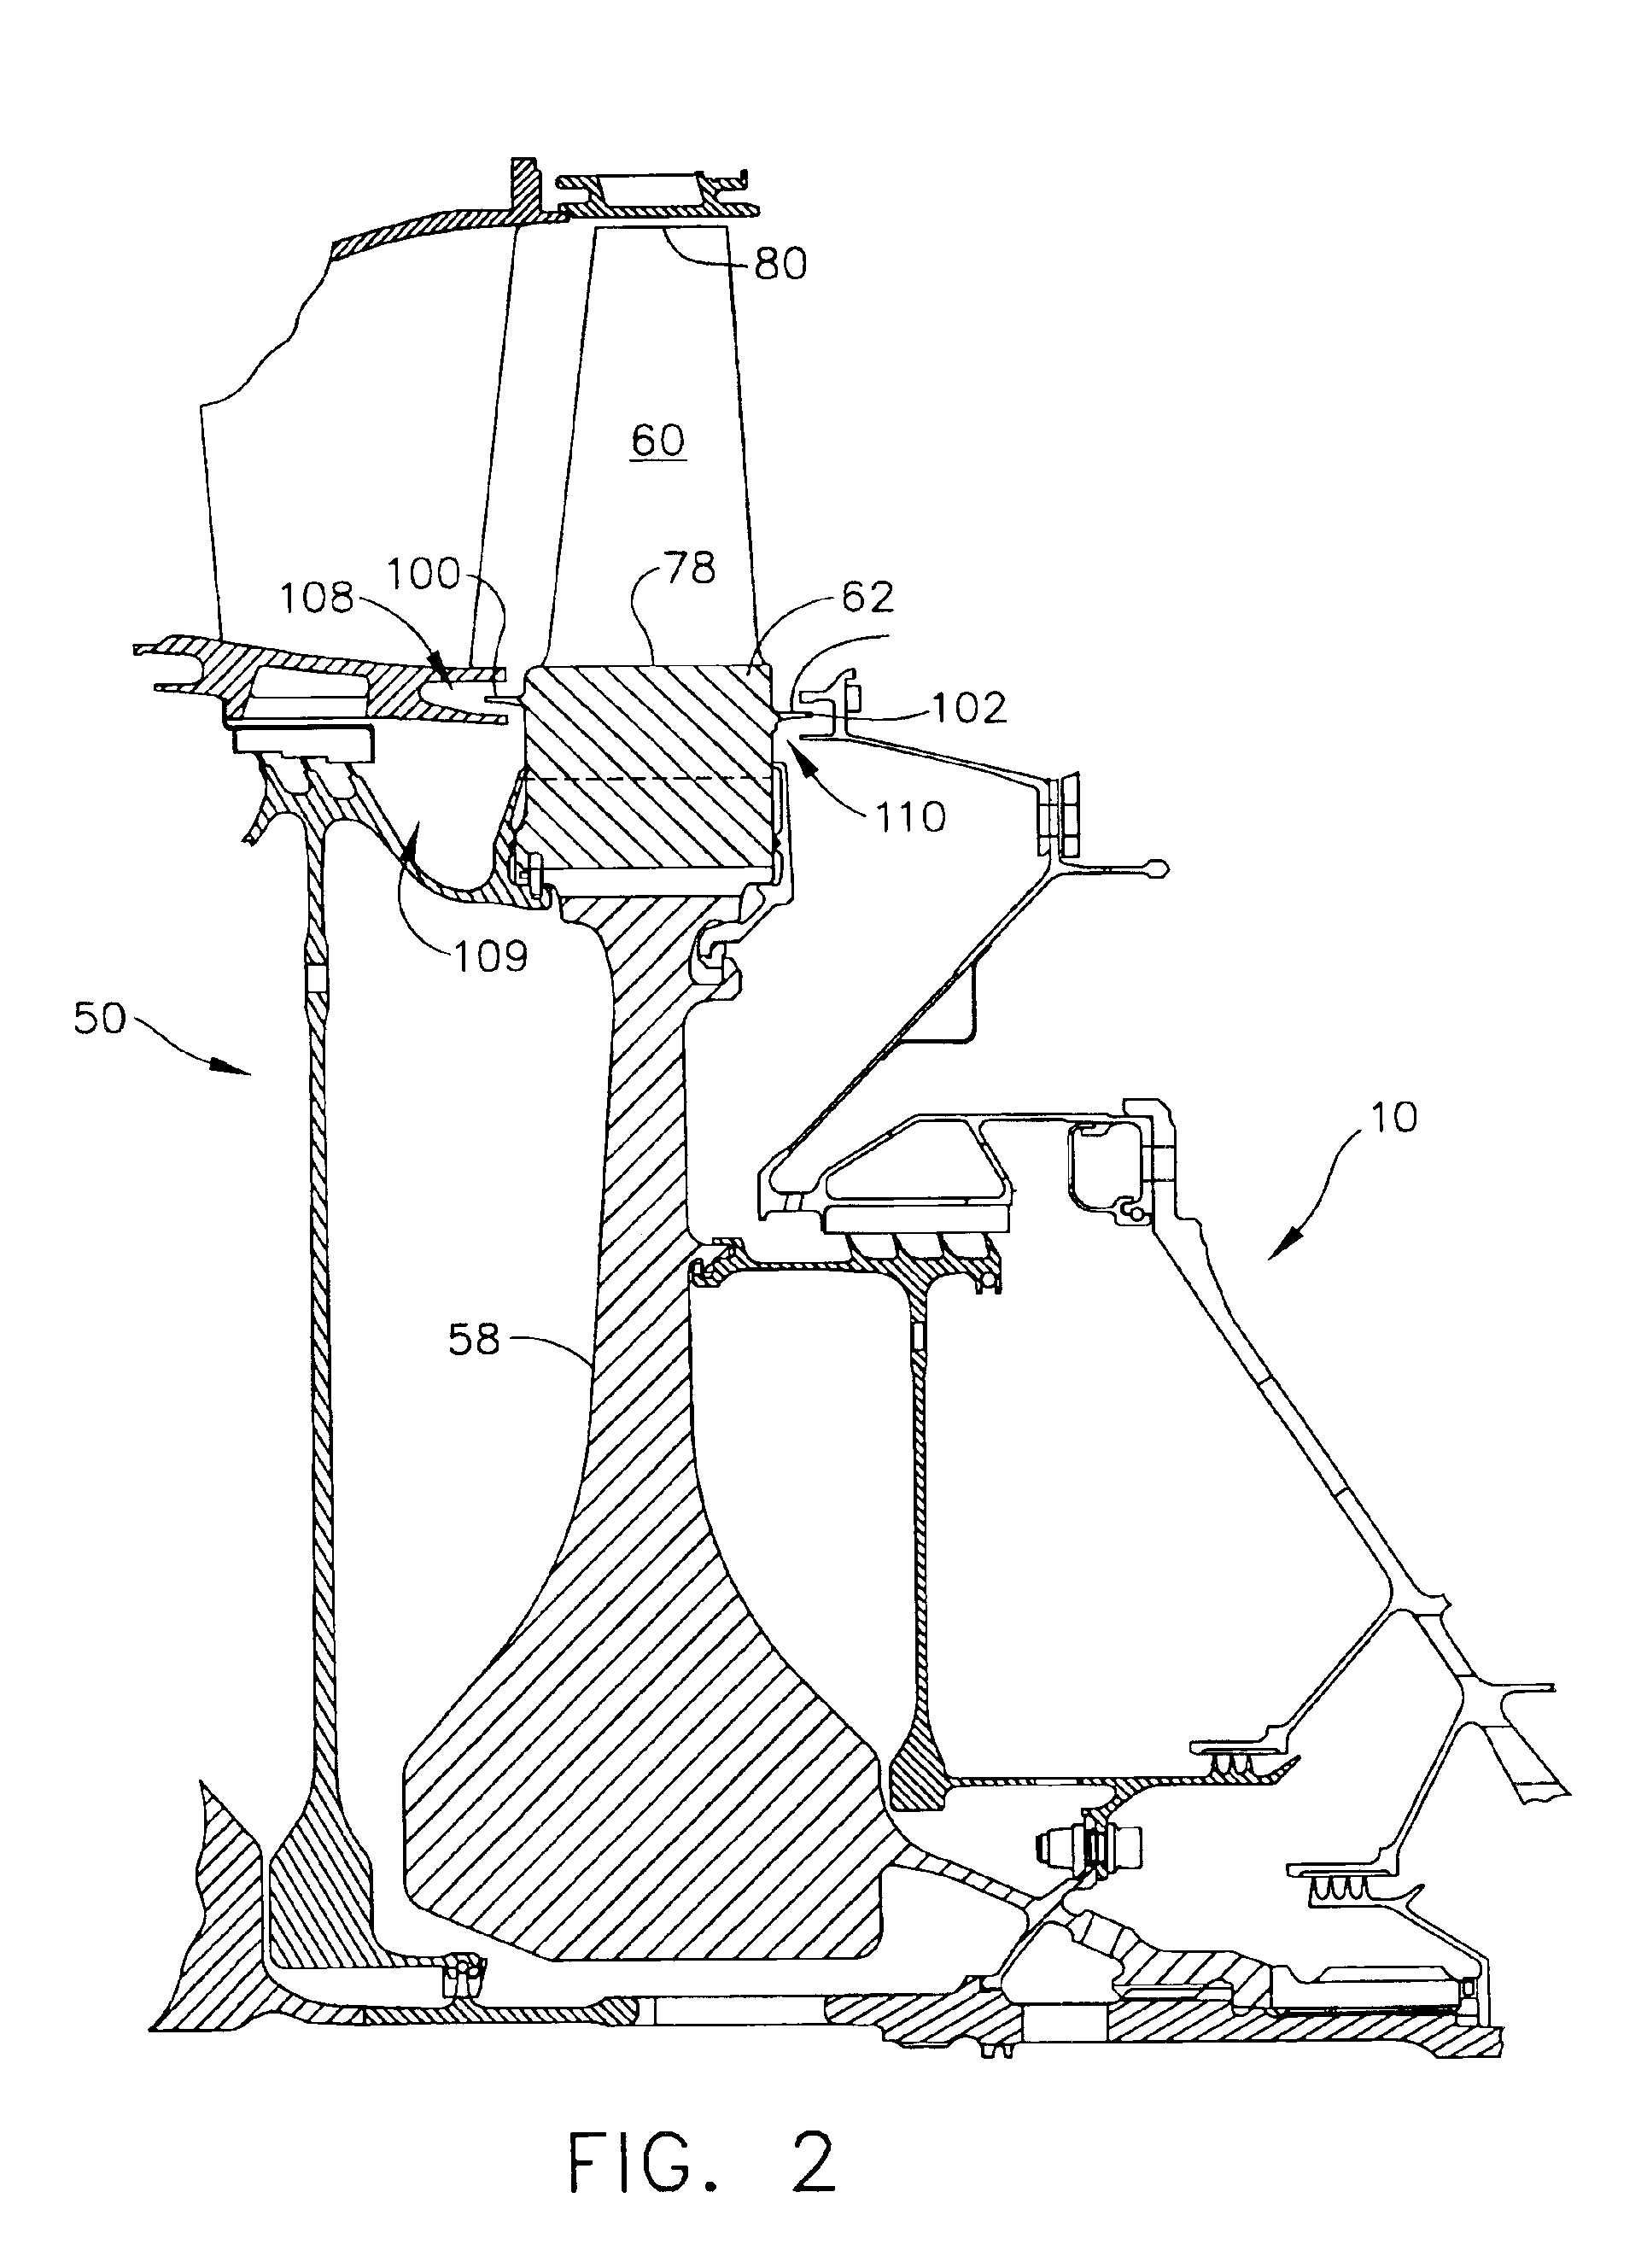 Methods and apparatus for cooling gas turbine engine rotor assemblies